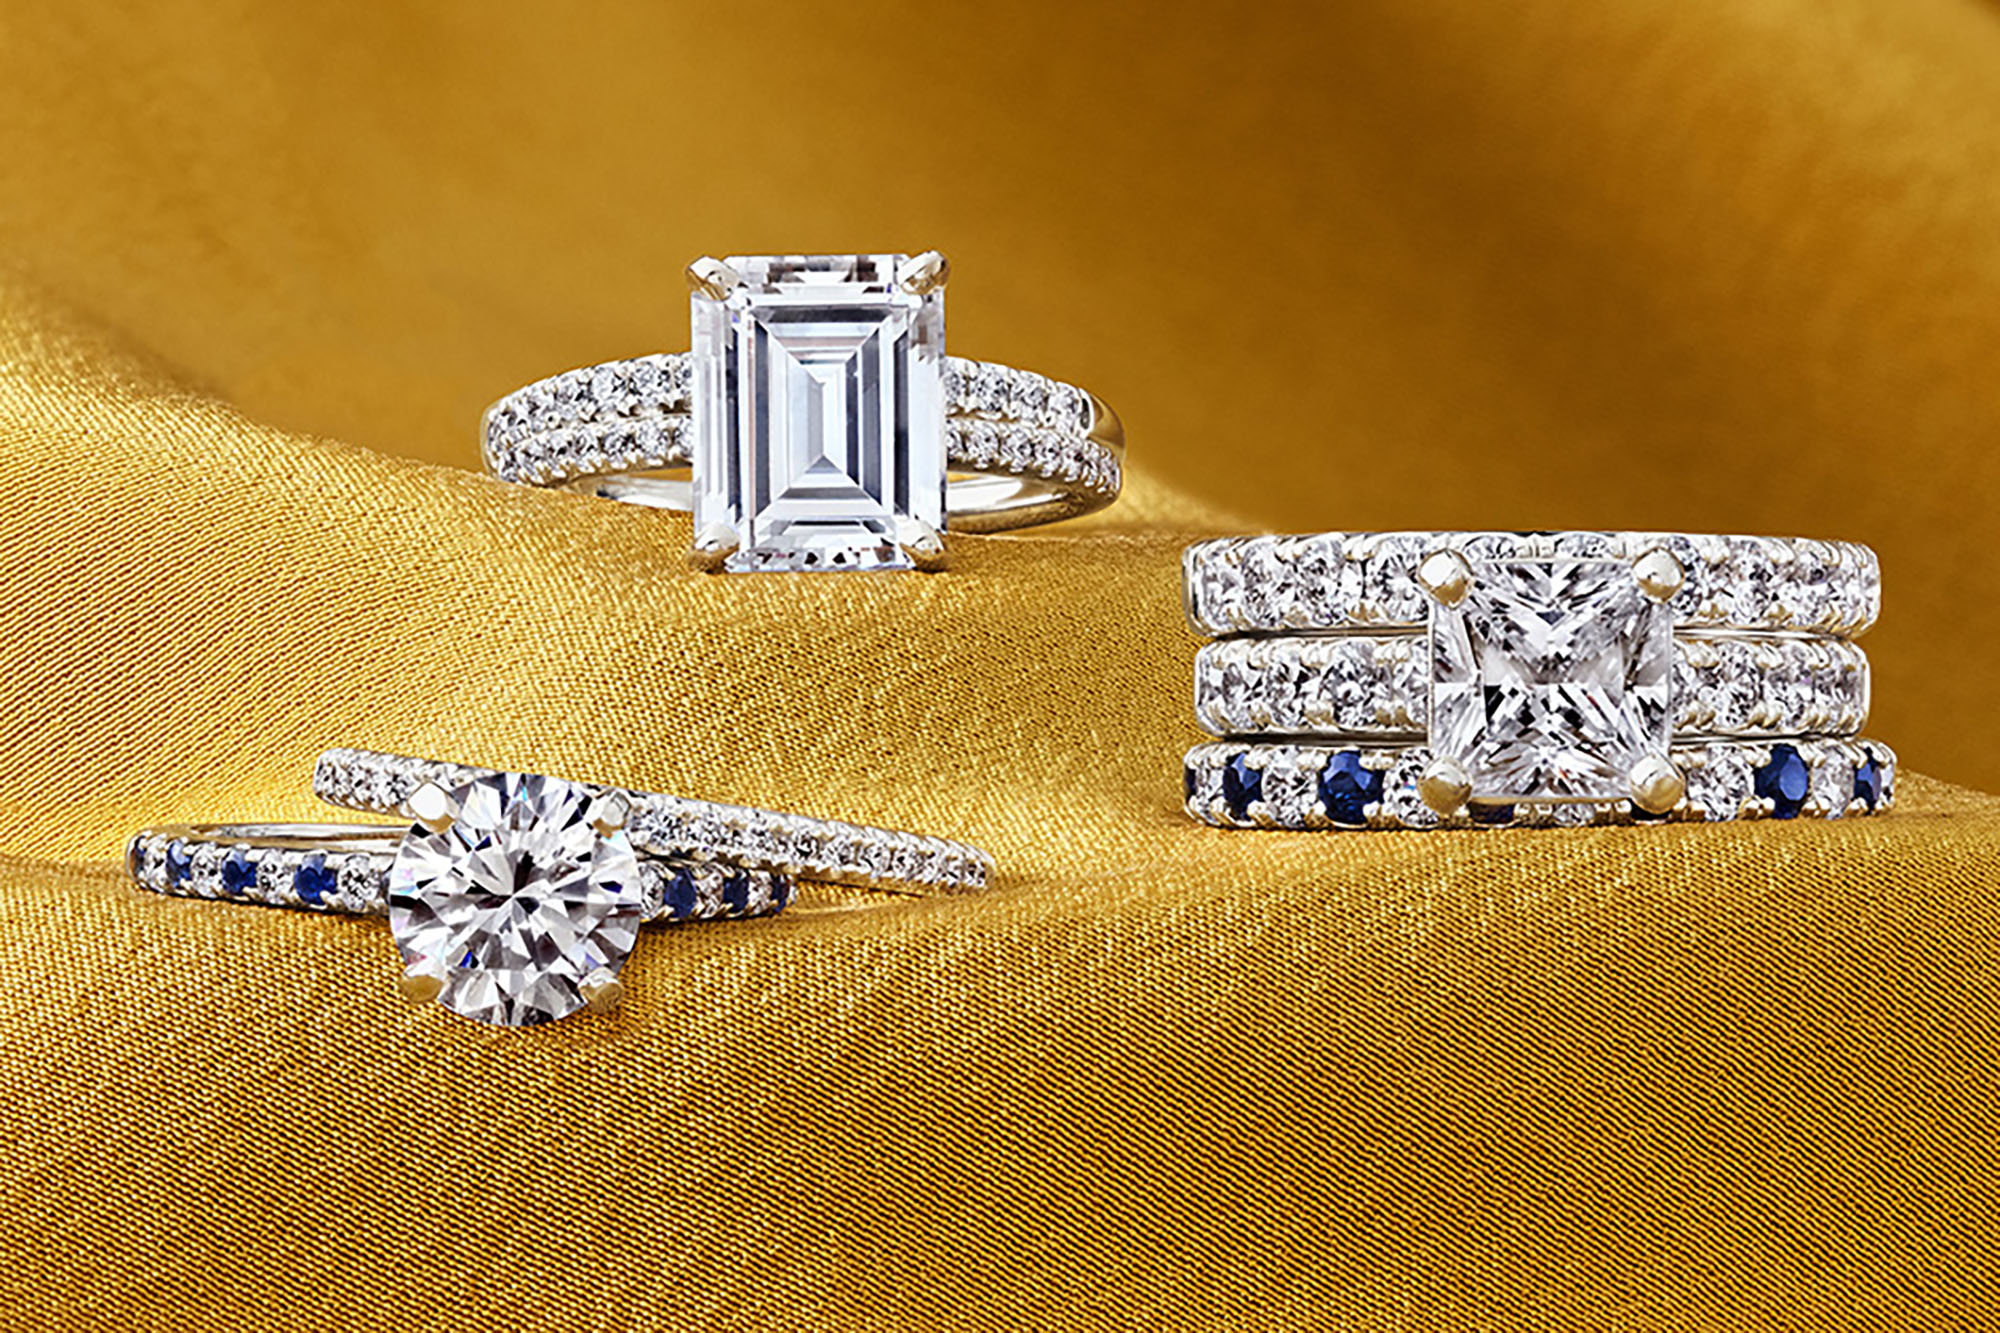 Where to Sell Your Engagement Ring (and Not Get Screwed)